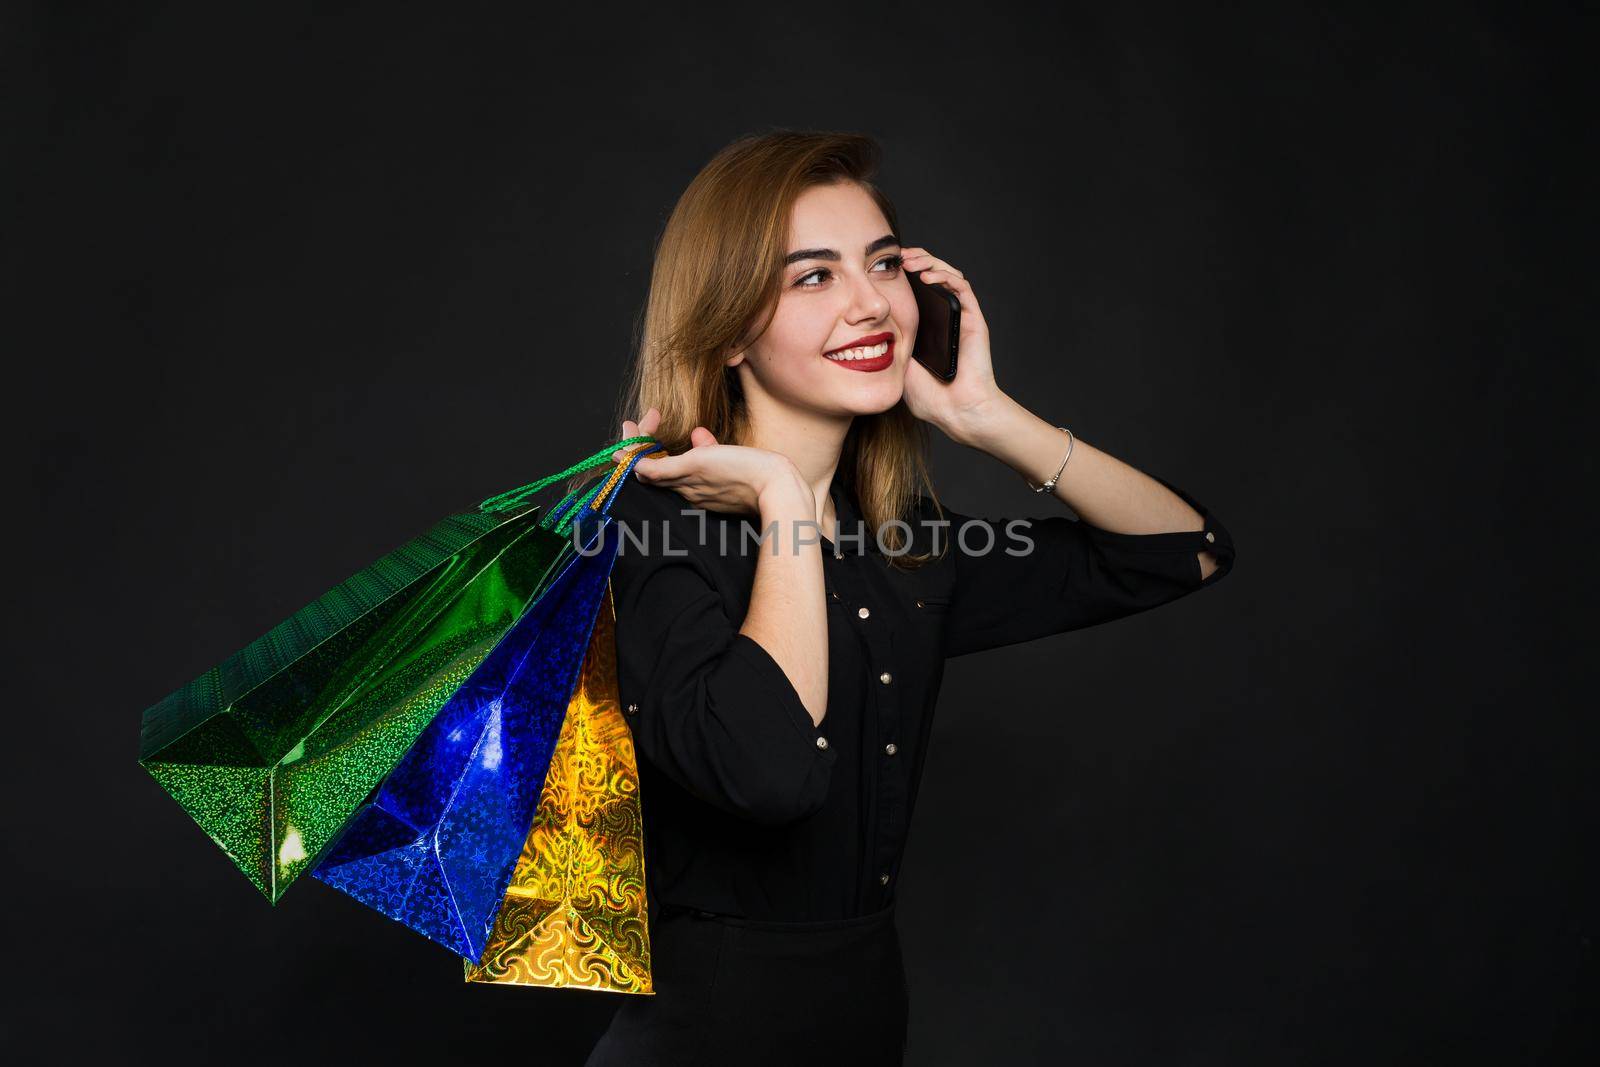 young woman with packages, shopping, discounts on a brown background. by StudioPeace